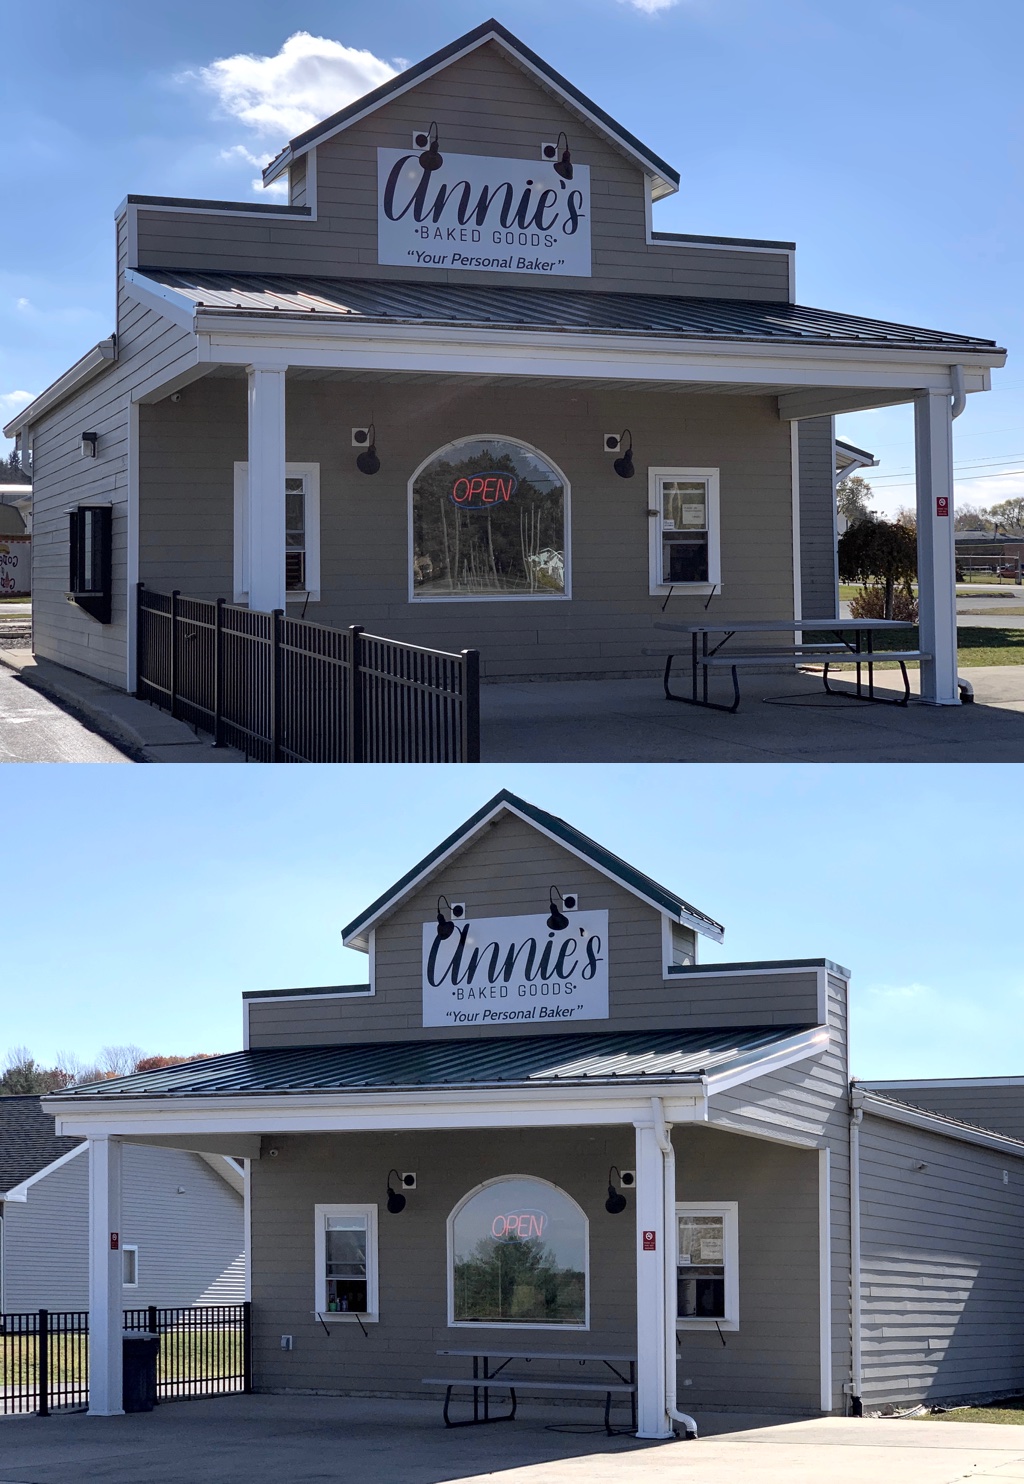 The Annie's Baked Goods shop